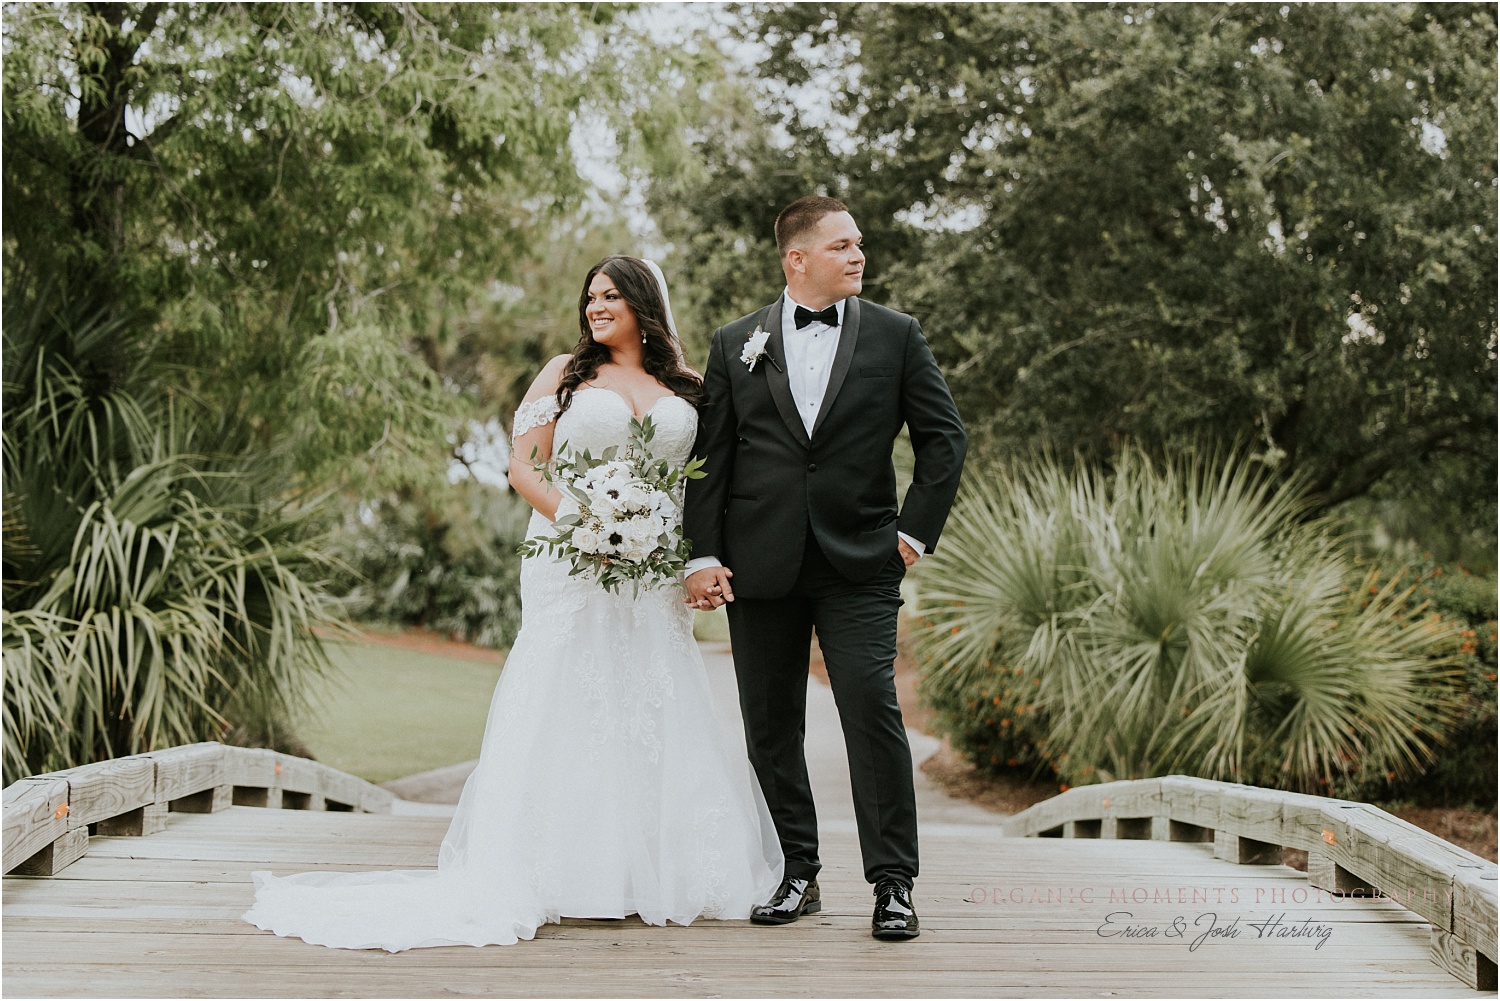 Parkland Country Club Wedding organic moments photography